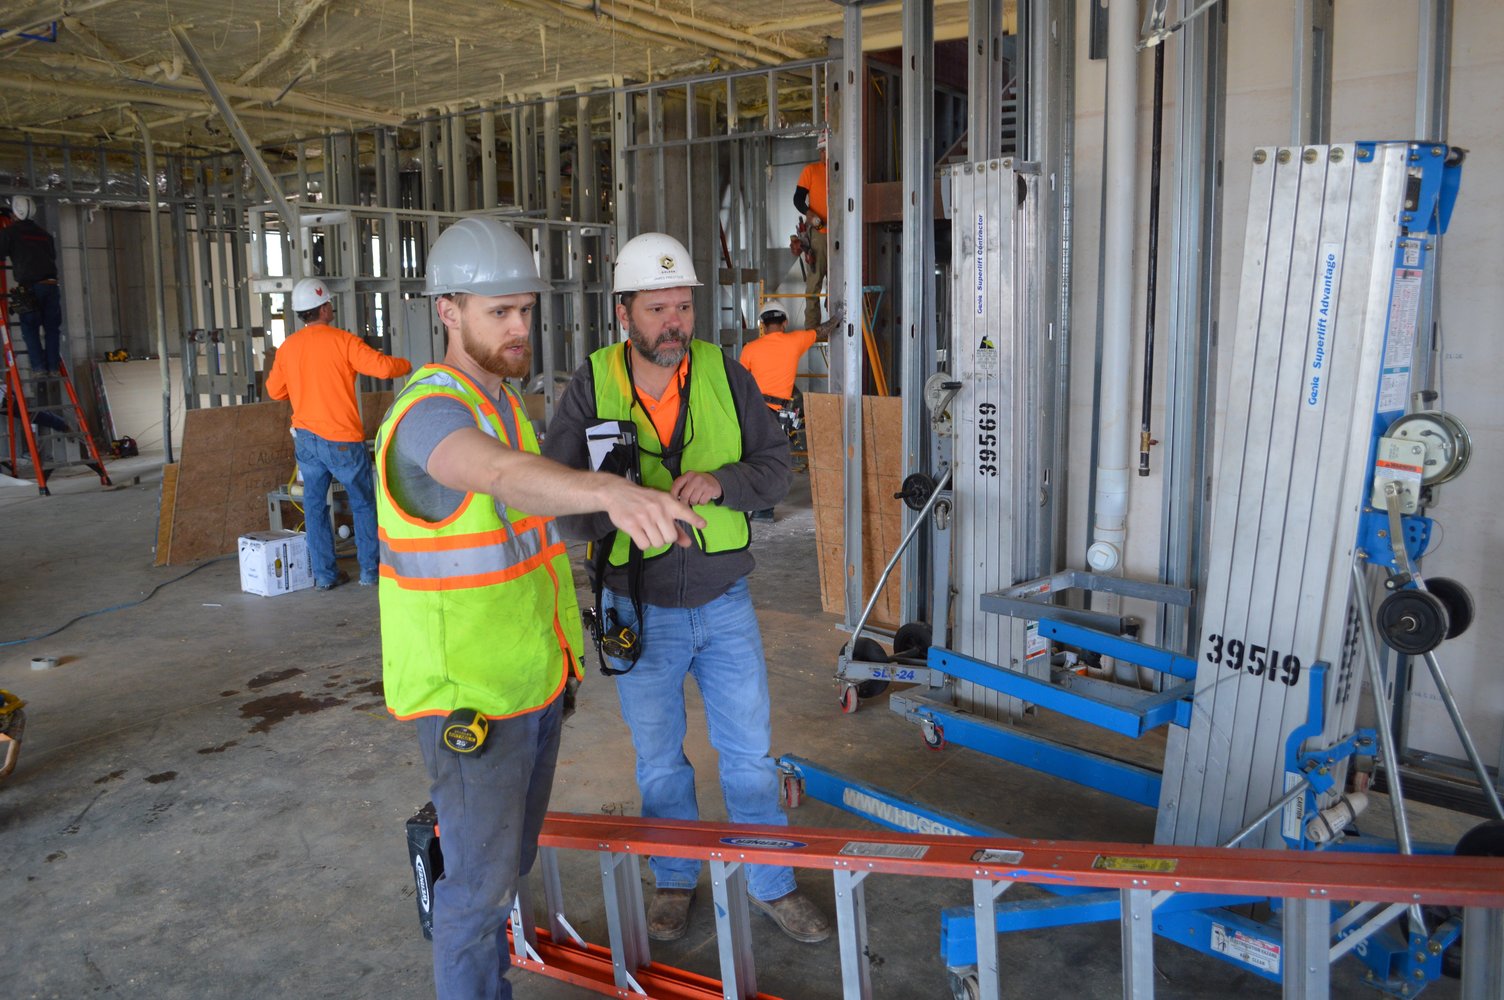 Cory Meyer of Modus Studio, the firm that designed Uptown Fayetteville Apartments + Shops, talks with a worker at the construction site.